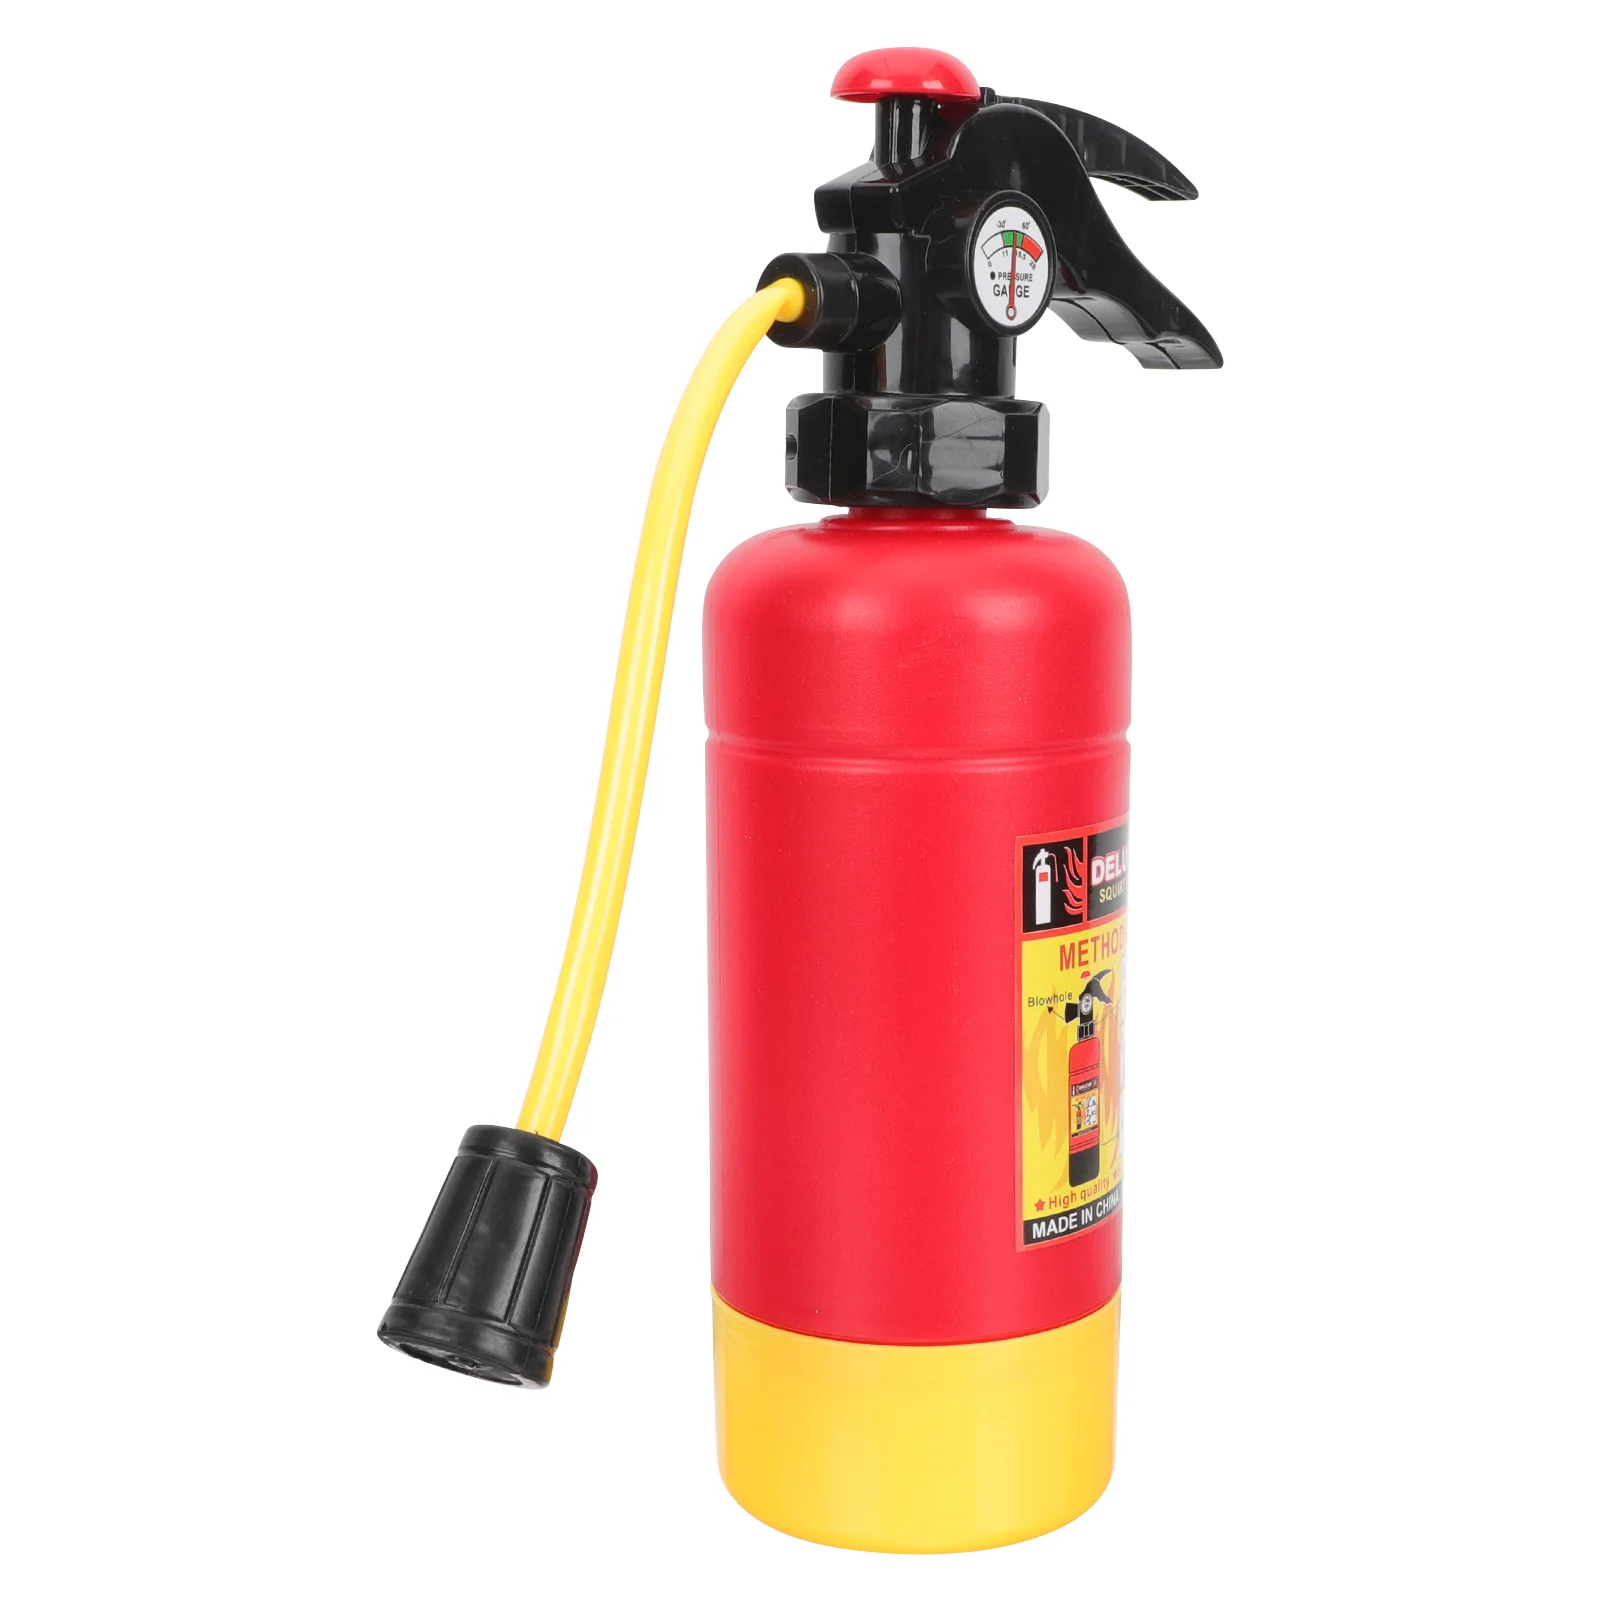 

Fire Extinguisher Water Squirt Toddler Beach Kids Pool Mini Realistic Firefighter Fun Outdoor Summer Toy Boys Girls